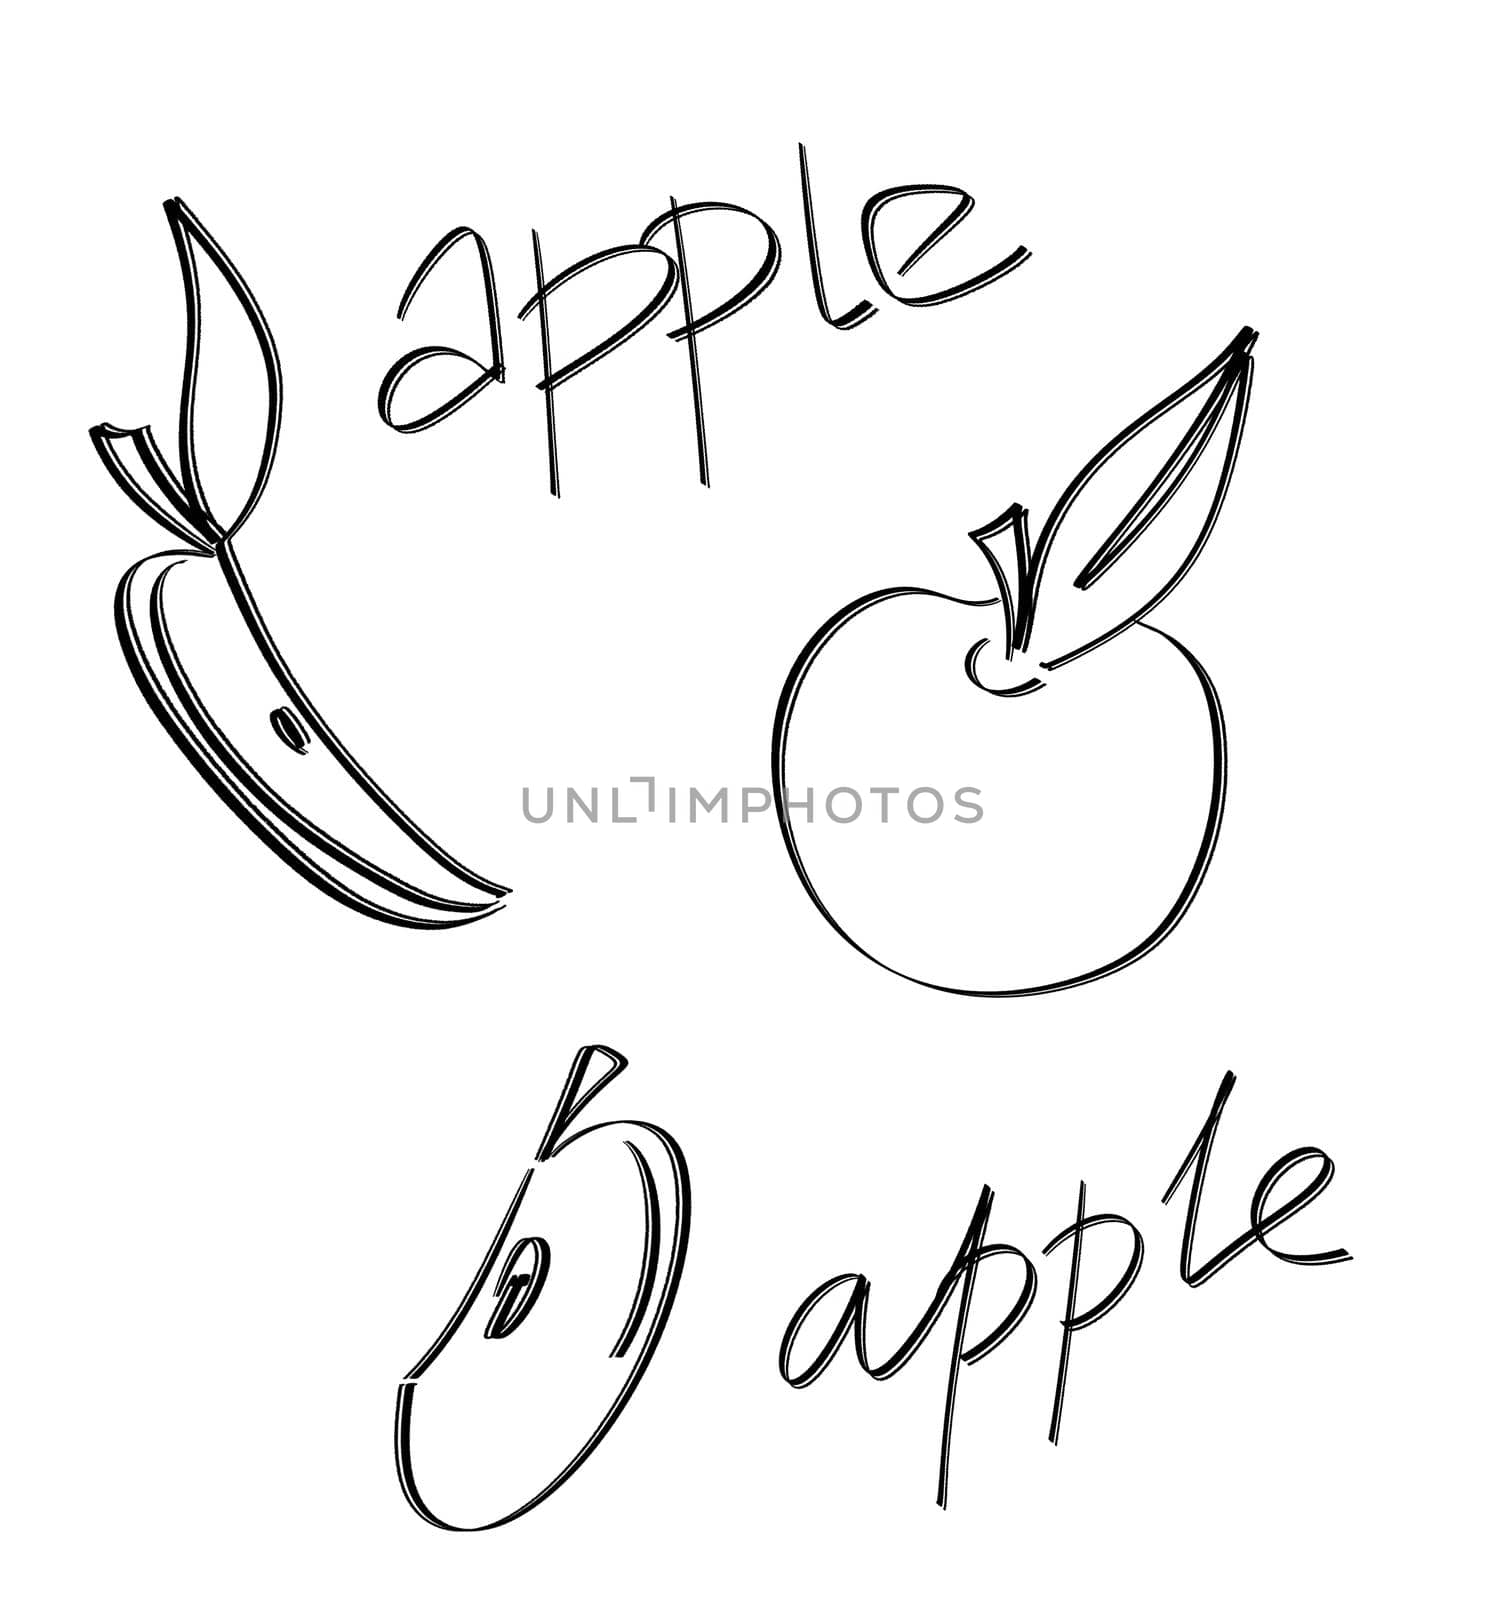 Fruit hand drawn. Fruits. Whole and sliced apple. Apple doodle icon isolated on white background. Set apples fruit sketch illustration with handwritten text.